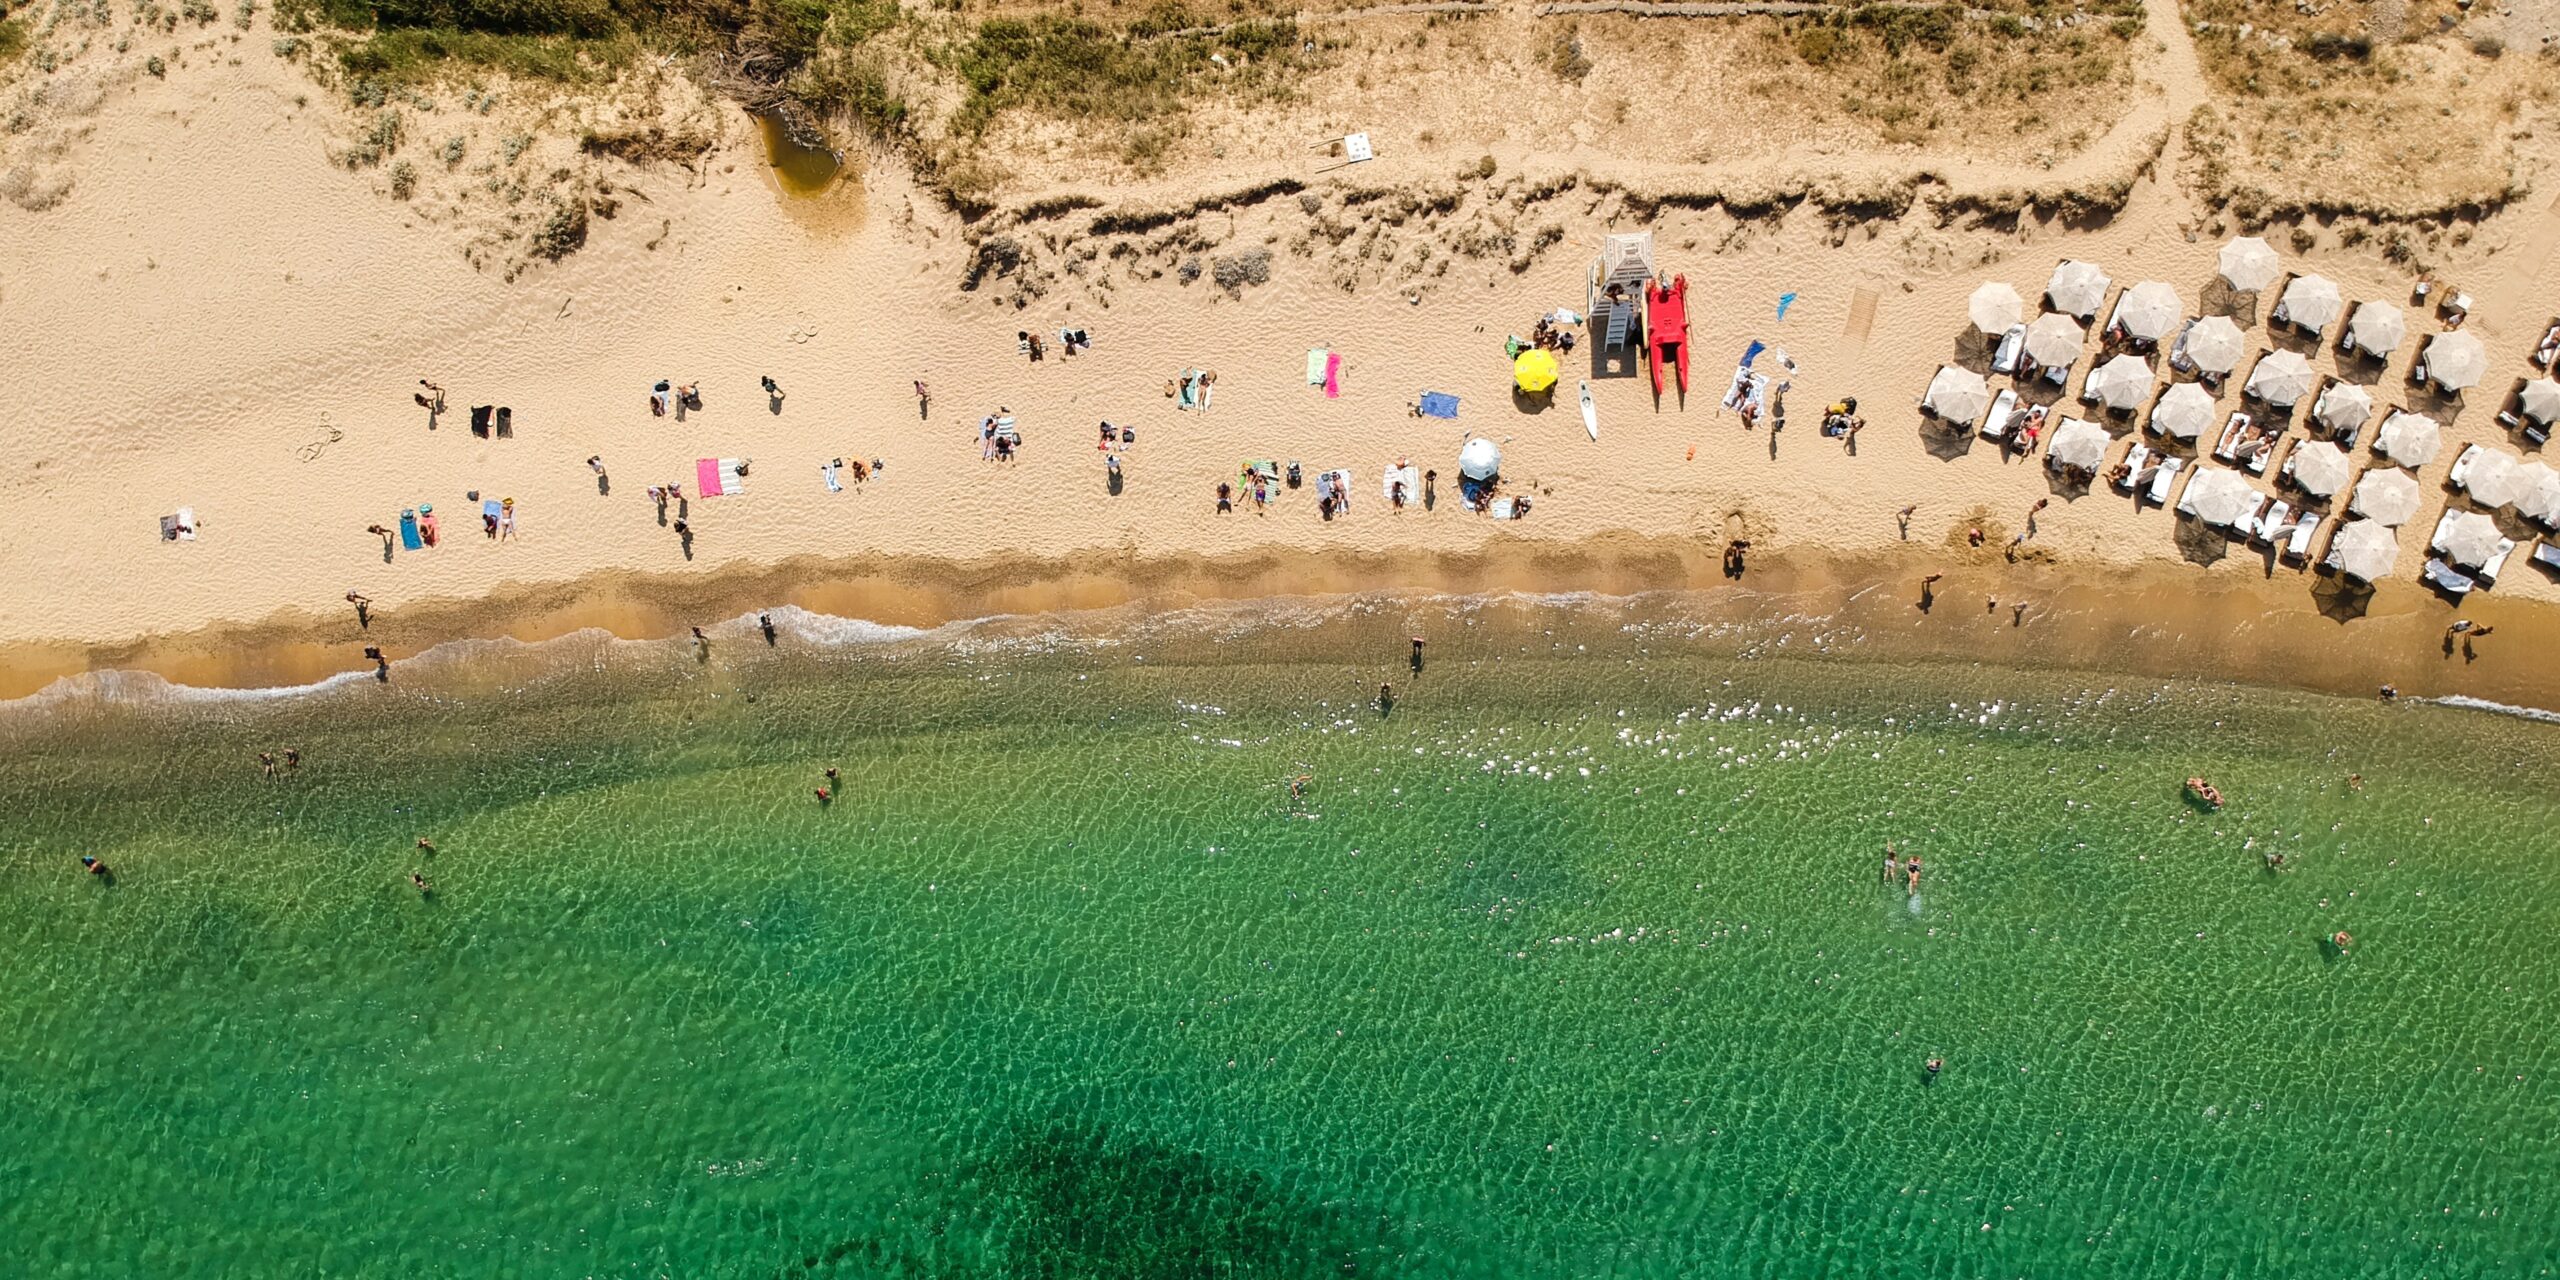 A lively scene at Panormos Beach where people are scattered across the sand, enjoying the sparkle of the sun on the water.